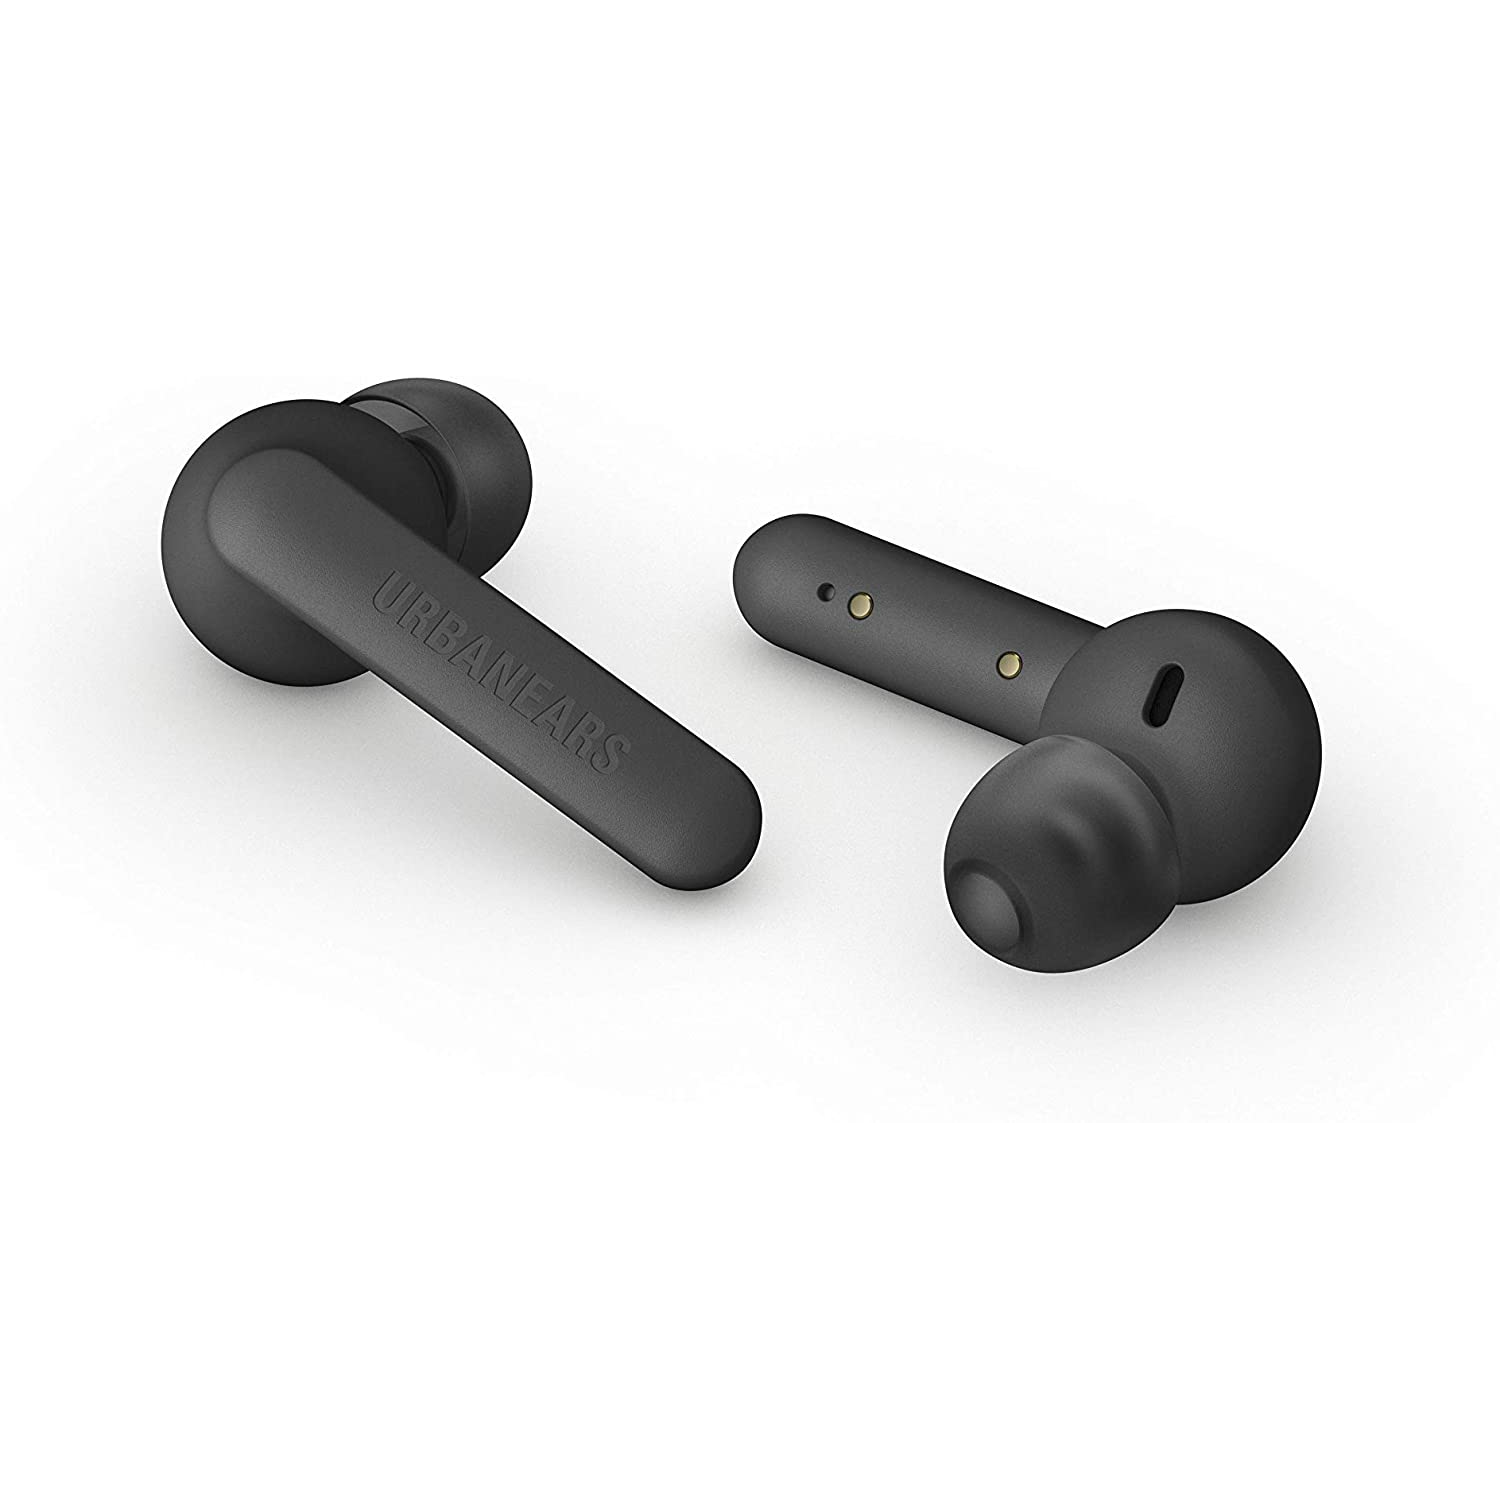 Urbanears Alby True Wireless Earbuds With Charging Case